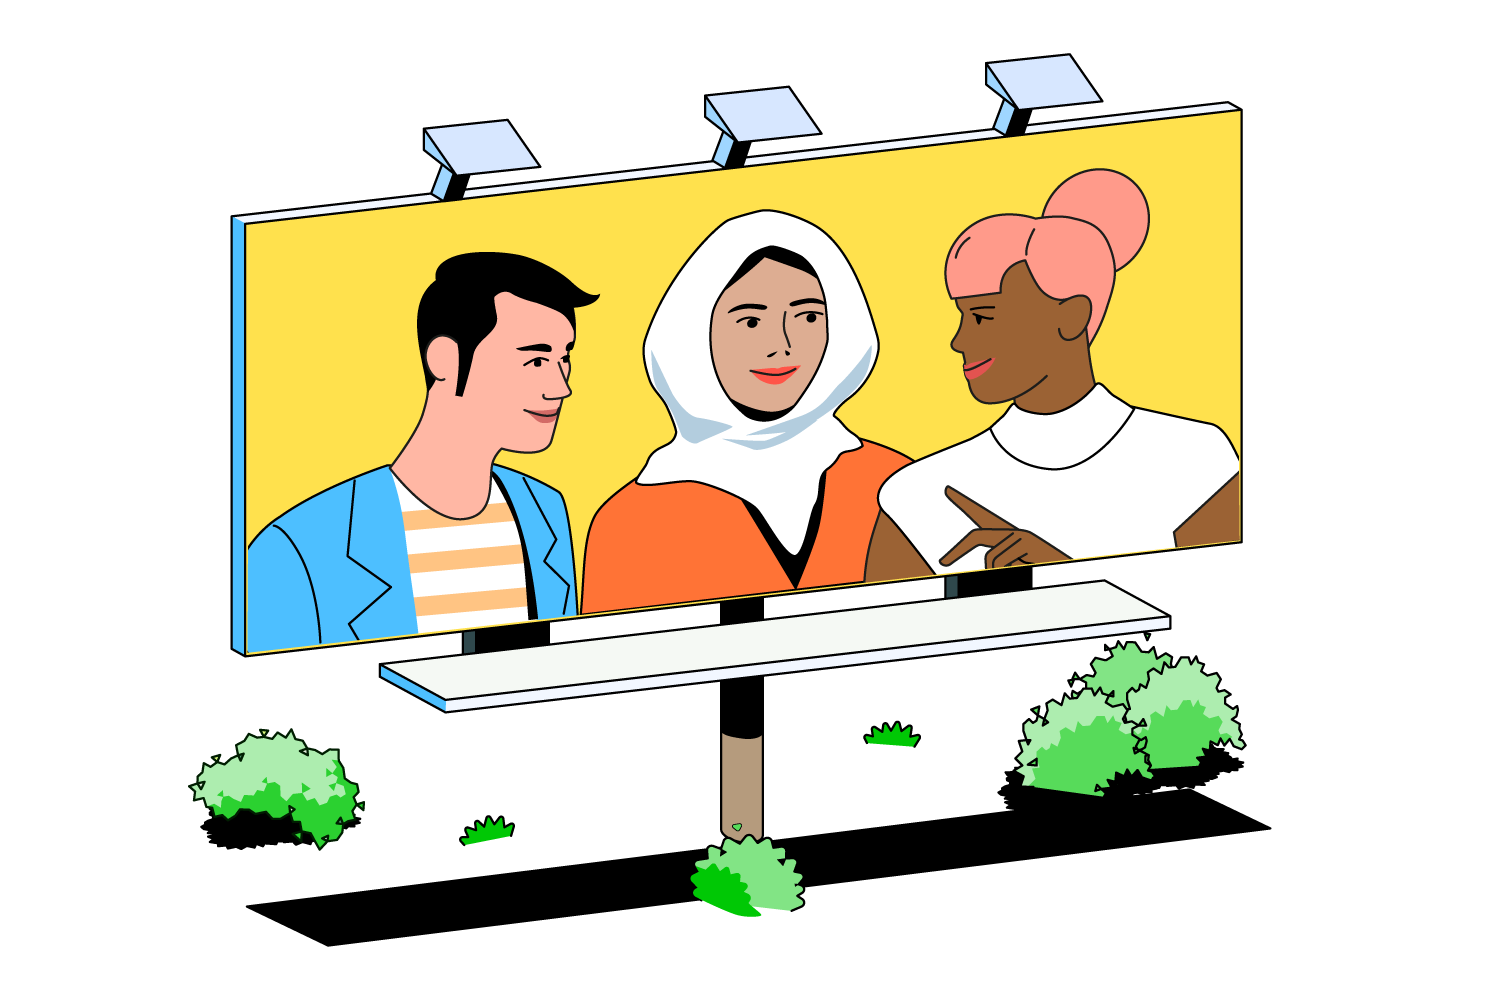 An illustration of a billboard poster featuring three people